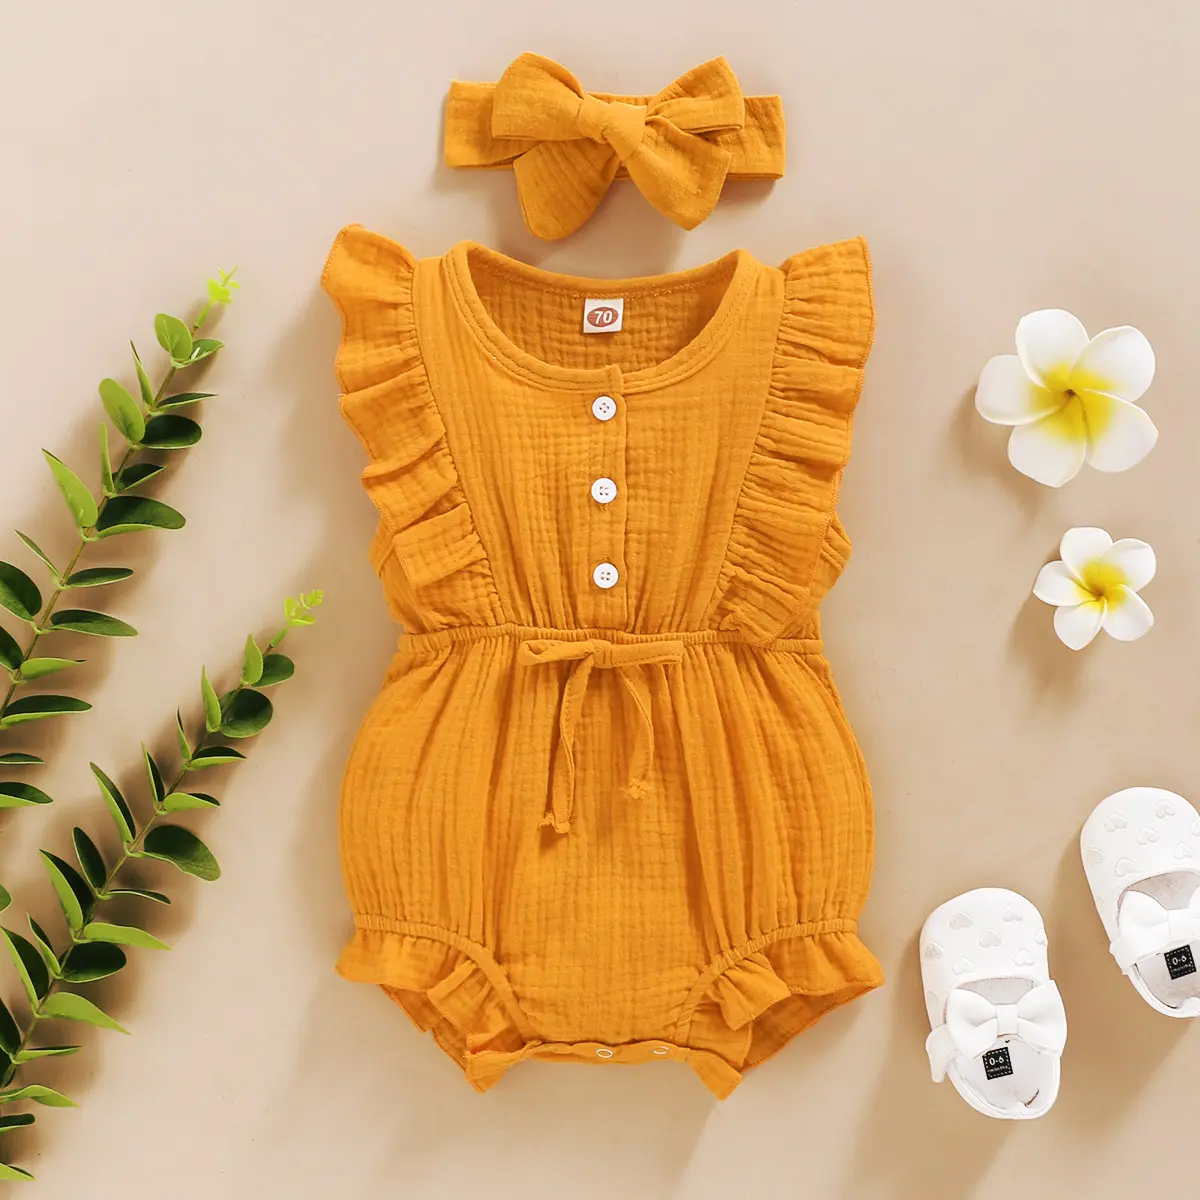 Infant Baby Girls Color Solid Ruffles Backcross Romper Sleeveless Candy Color Bodysuit Outfitsbaby Robes Xinantime Newborn Romper,Big Sales Yellow, 6-12 Months 